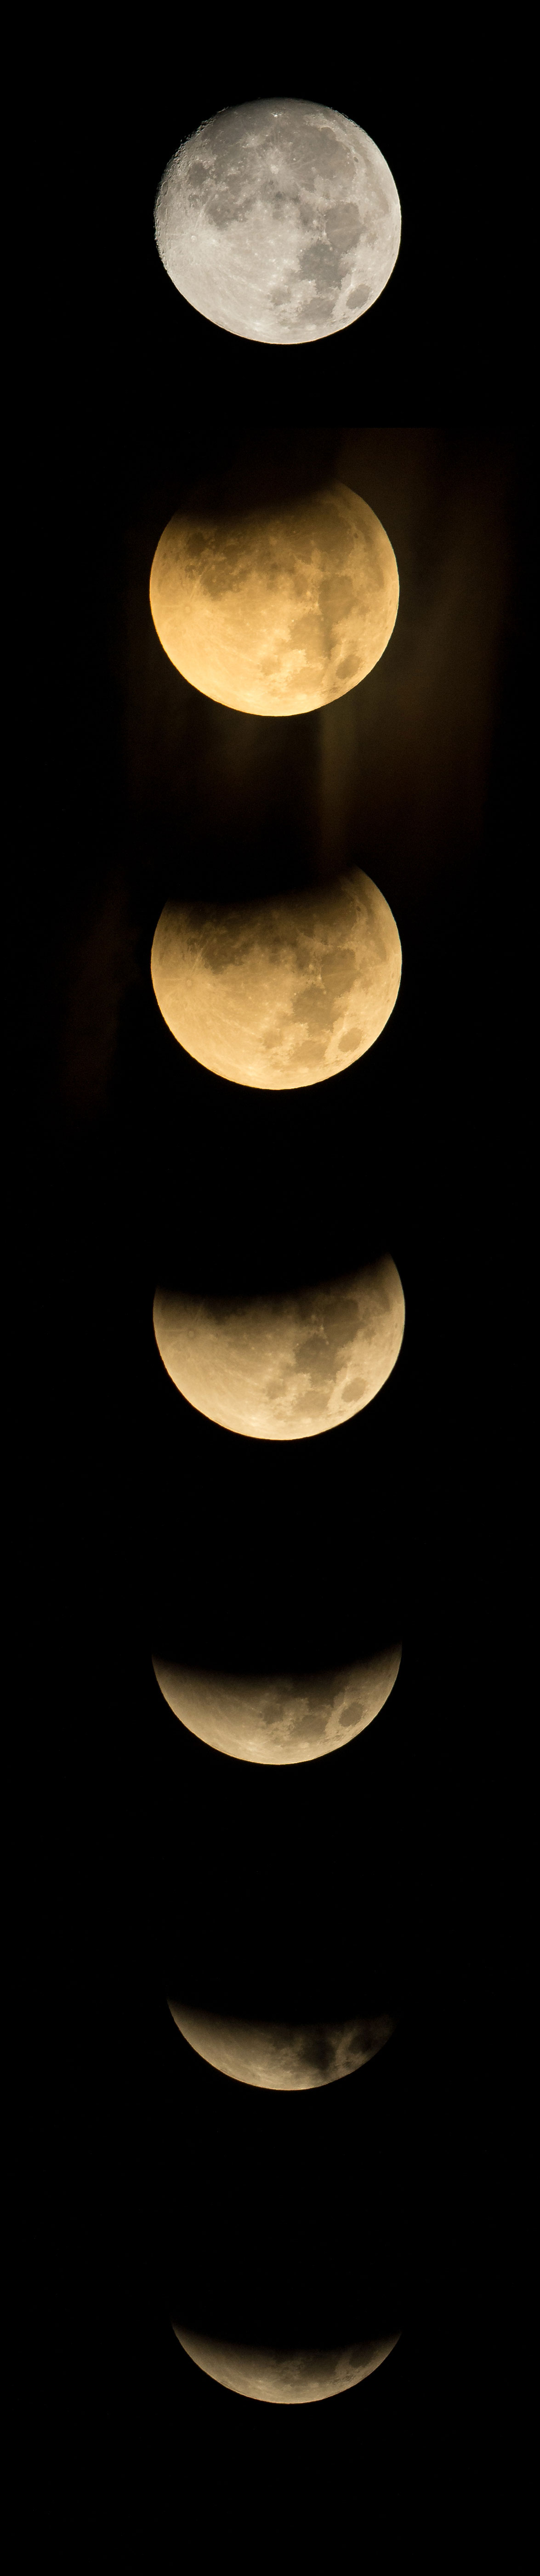 Seven images showing the shadow of Earth progressively covering more of the Moon until it is just a sliver in the sky.